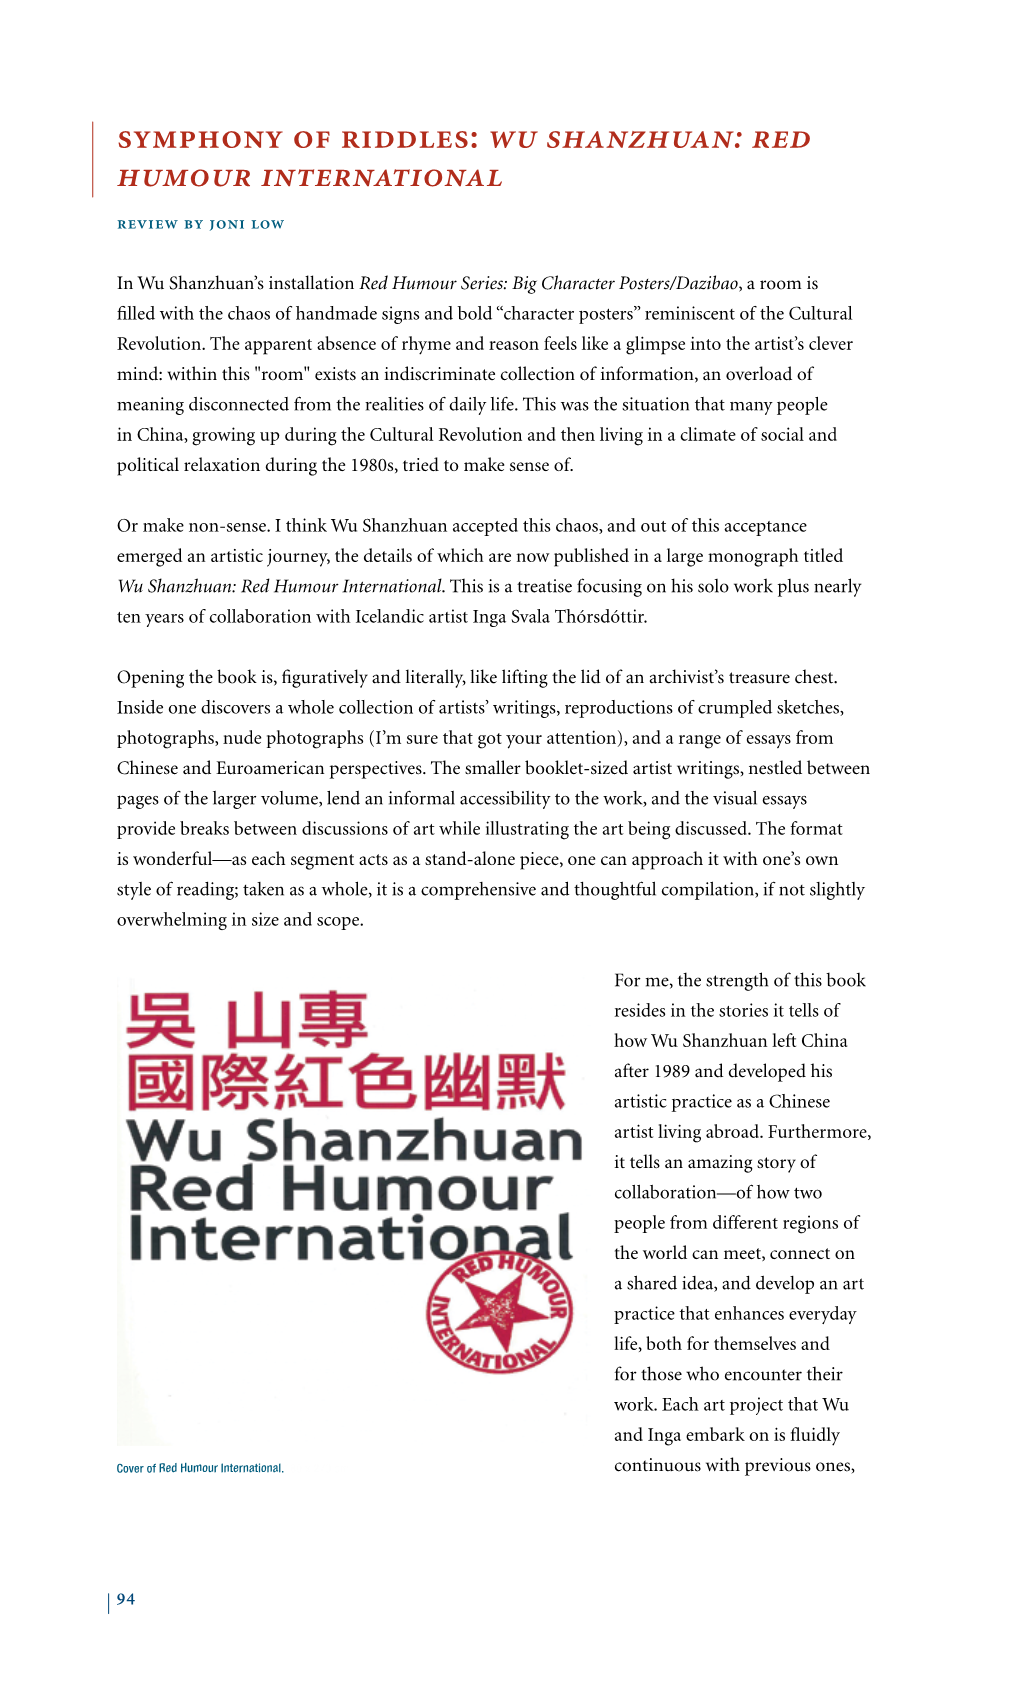 Wu Shanzhuan: Red Humour International Review by Joni Low